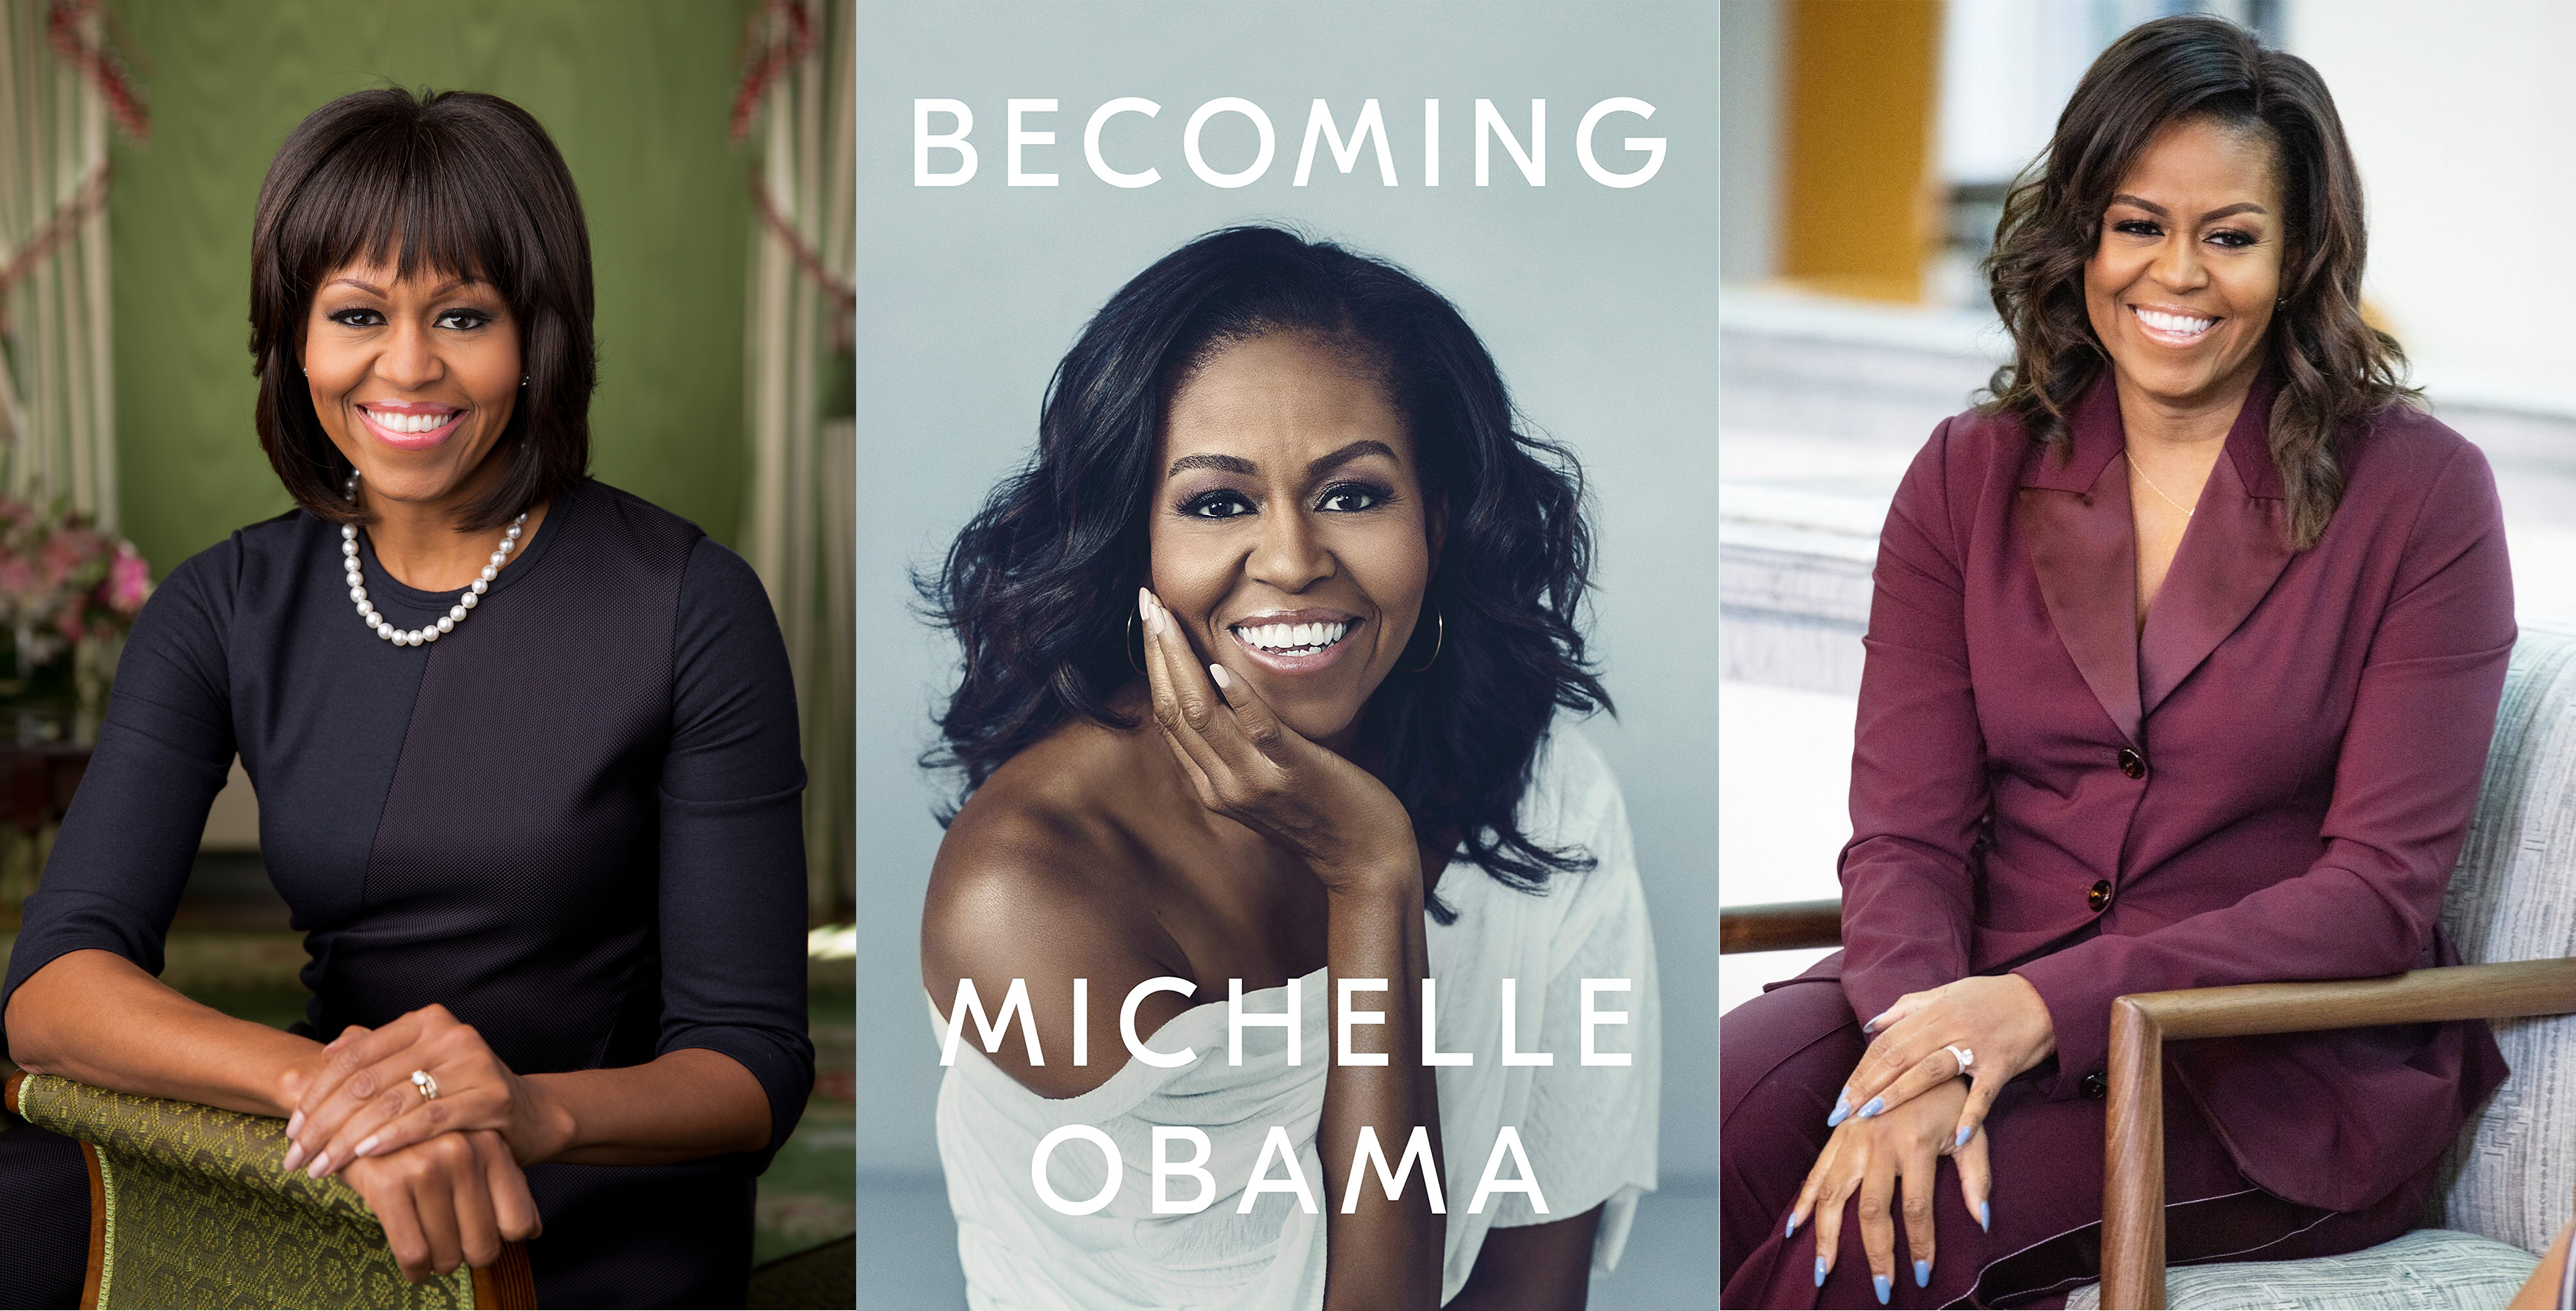 Thinking like a man: The typeface behind the First Lady